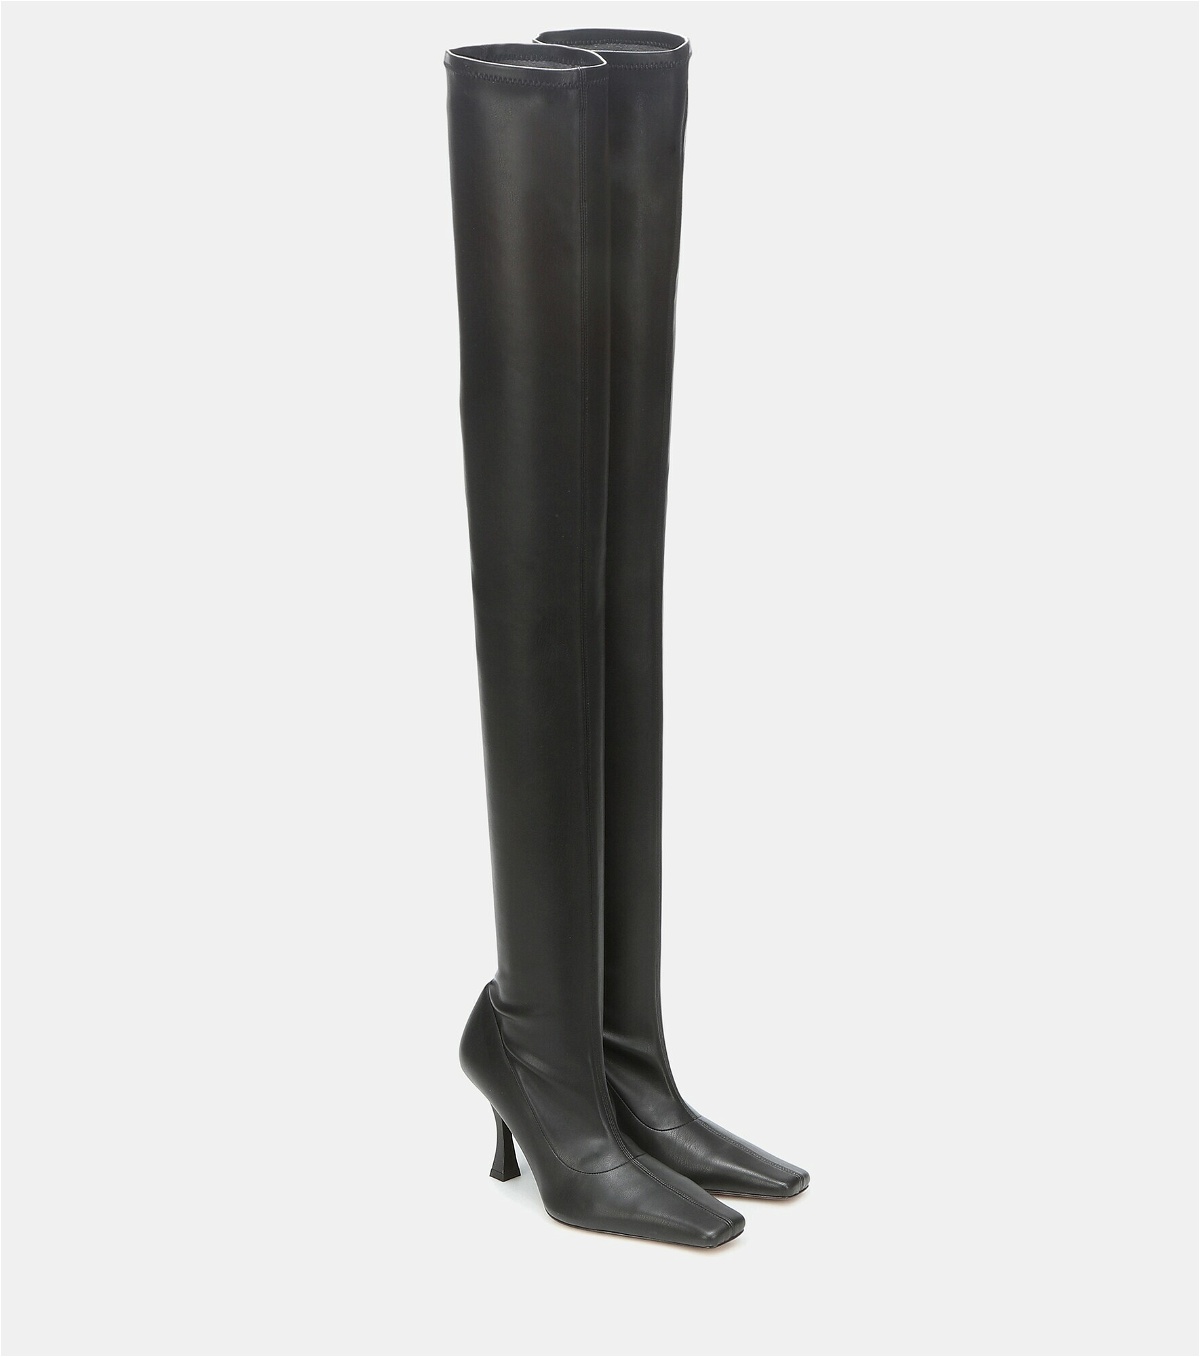 Proenza Schouler - Faux leather over-the-knee boots Proenza Schouler